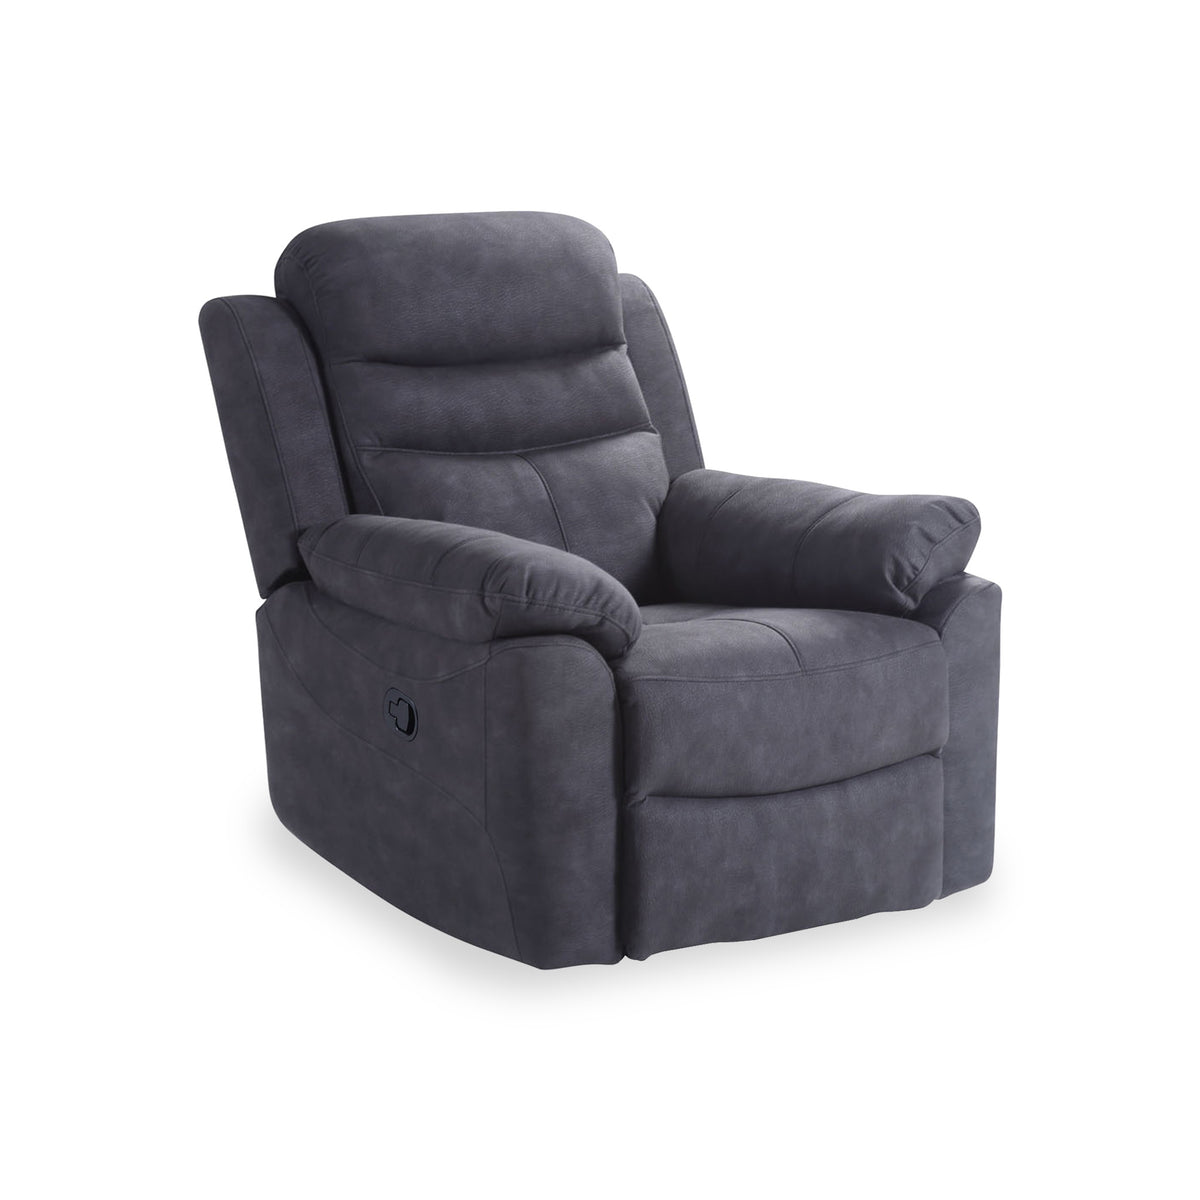 Conway Charcoal Reclining Armchair from Roseland Furniture